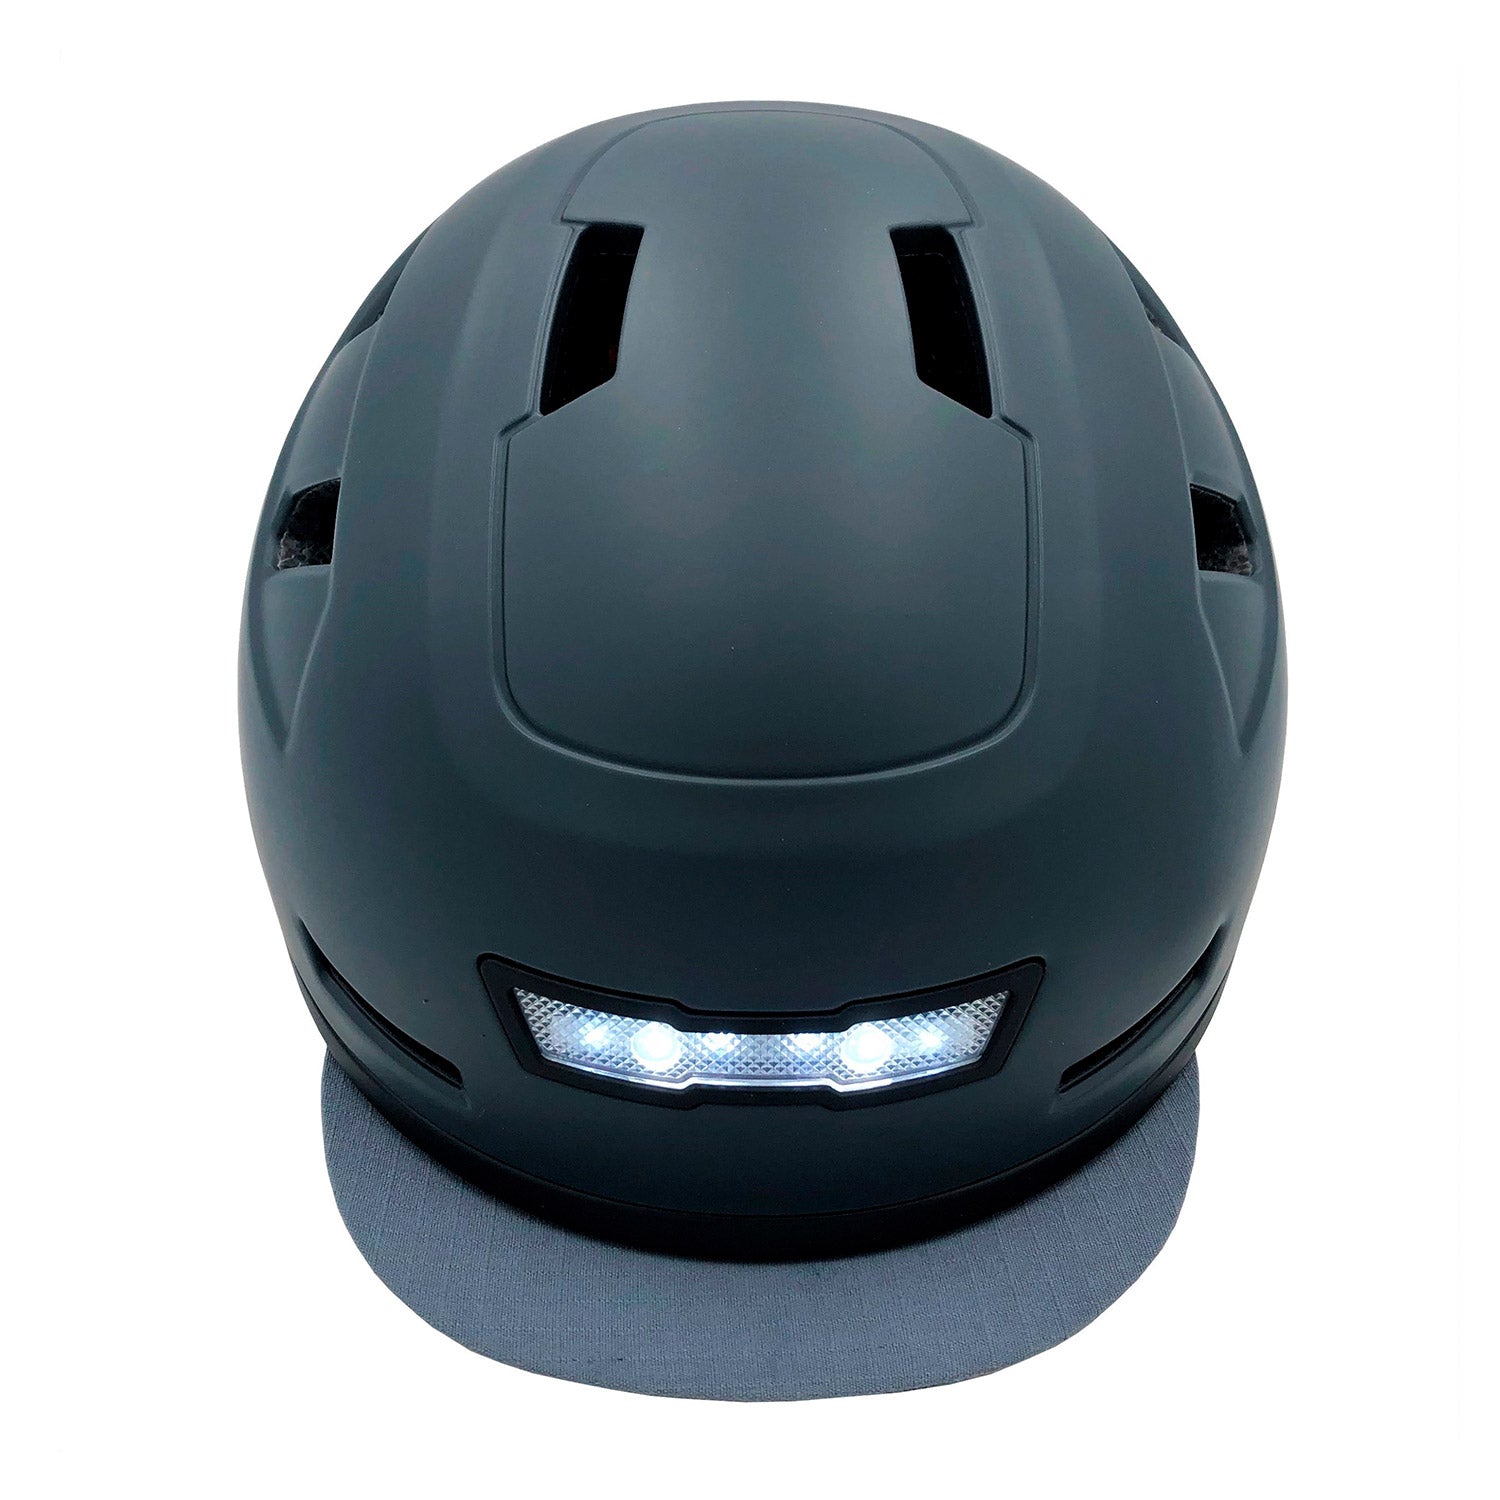 A black e-bike Helmet XNITO - Old School - Urbanite with integrated LED lights on the front, CPSC and NTA-8776 certified.